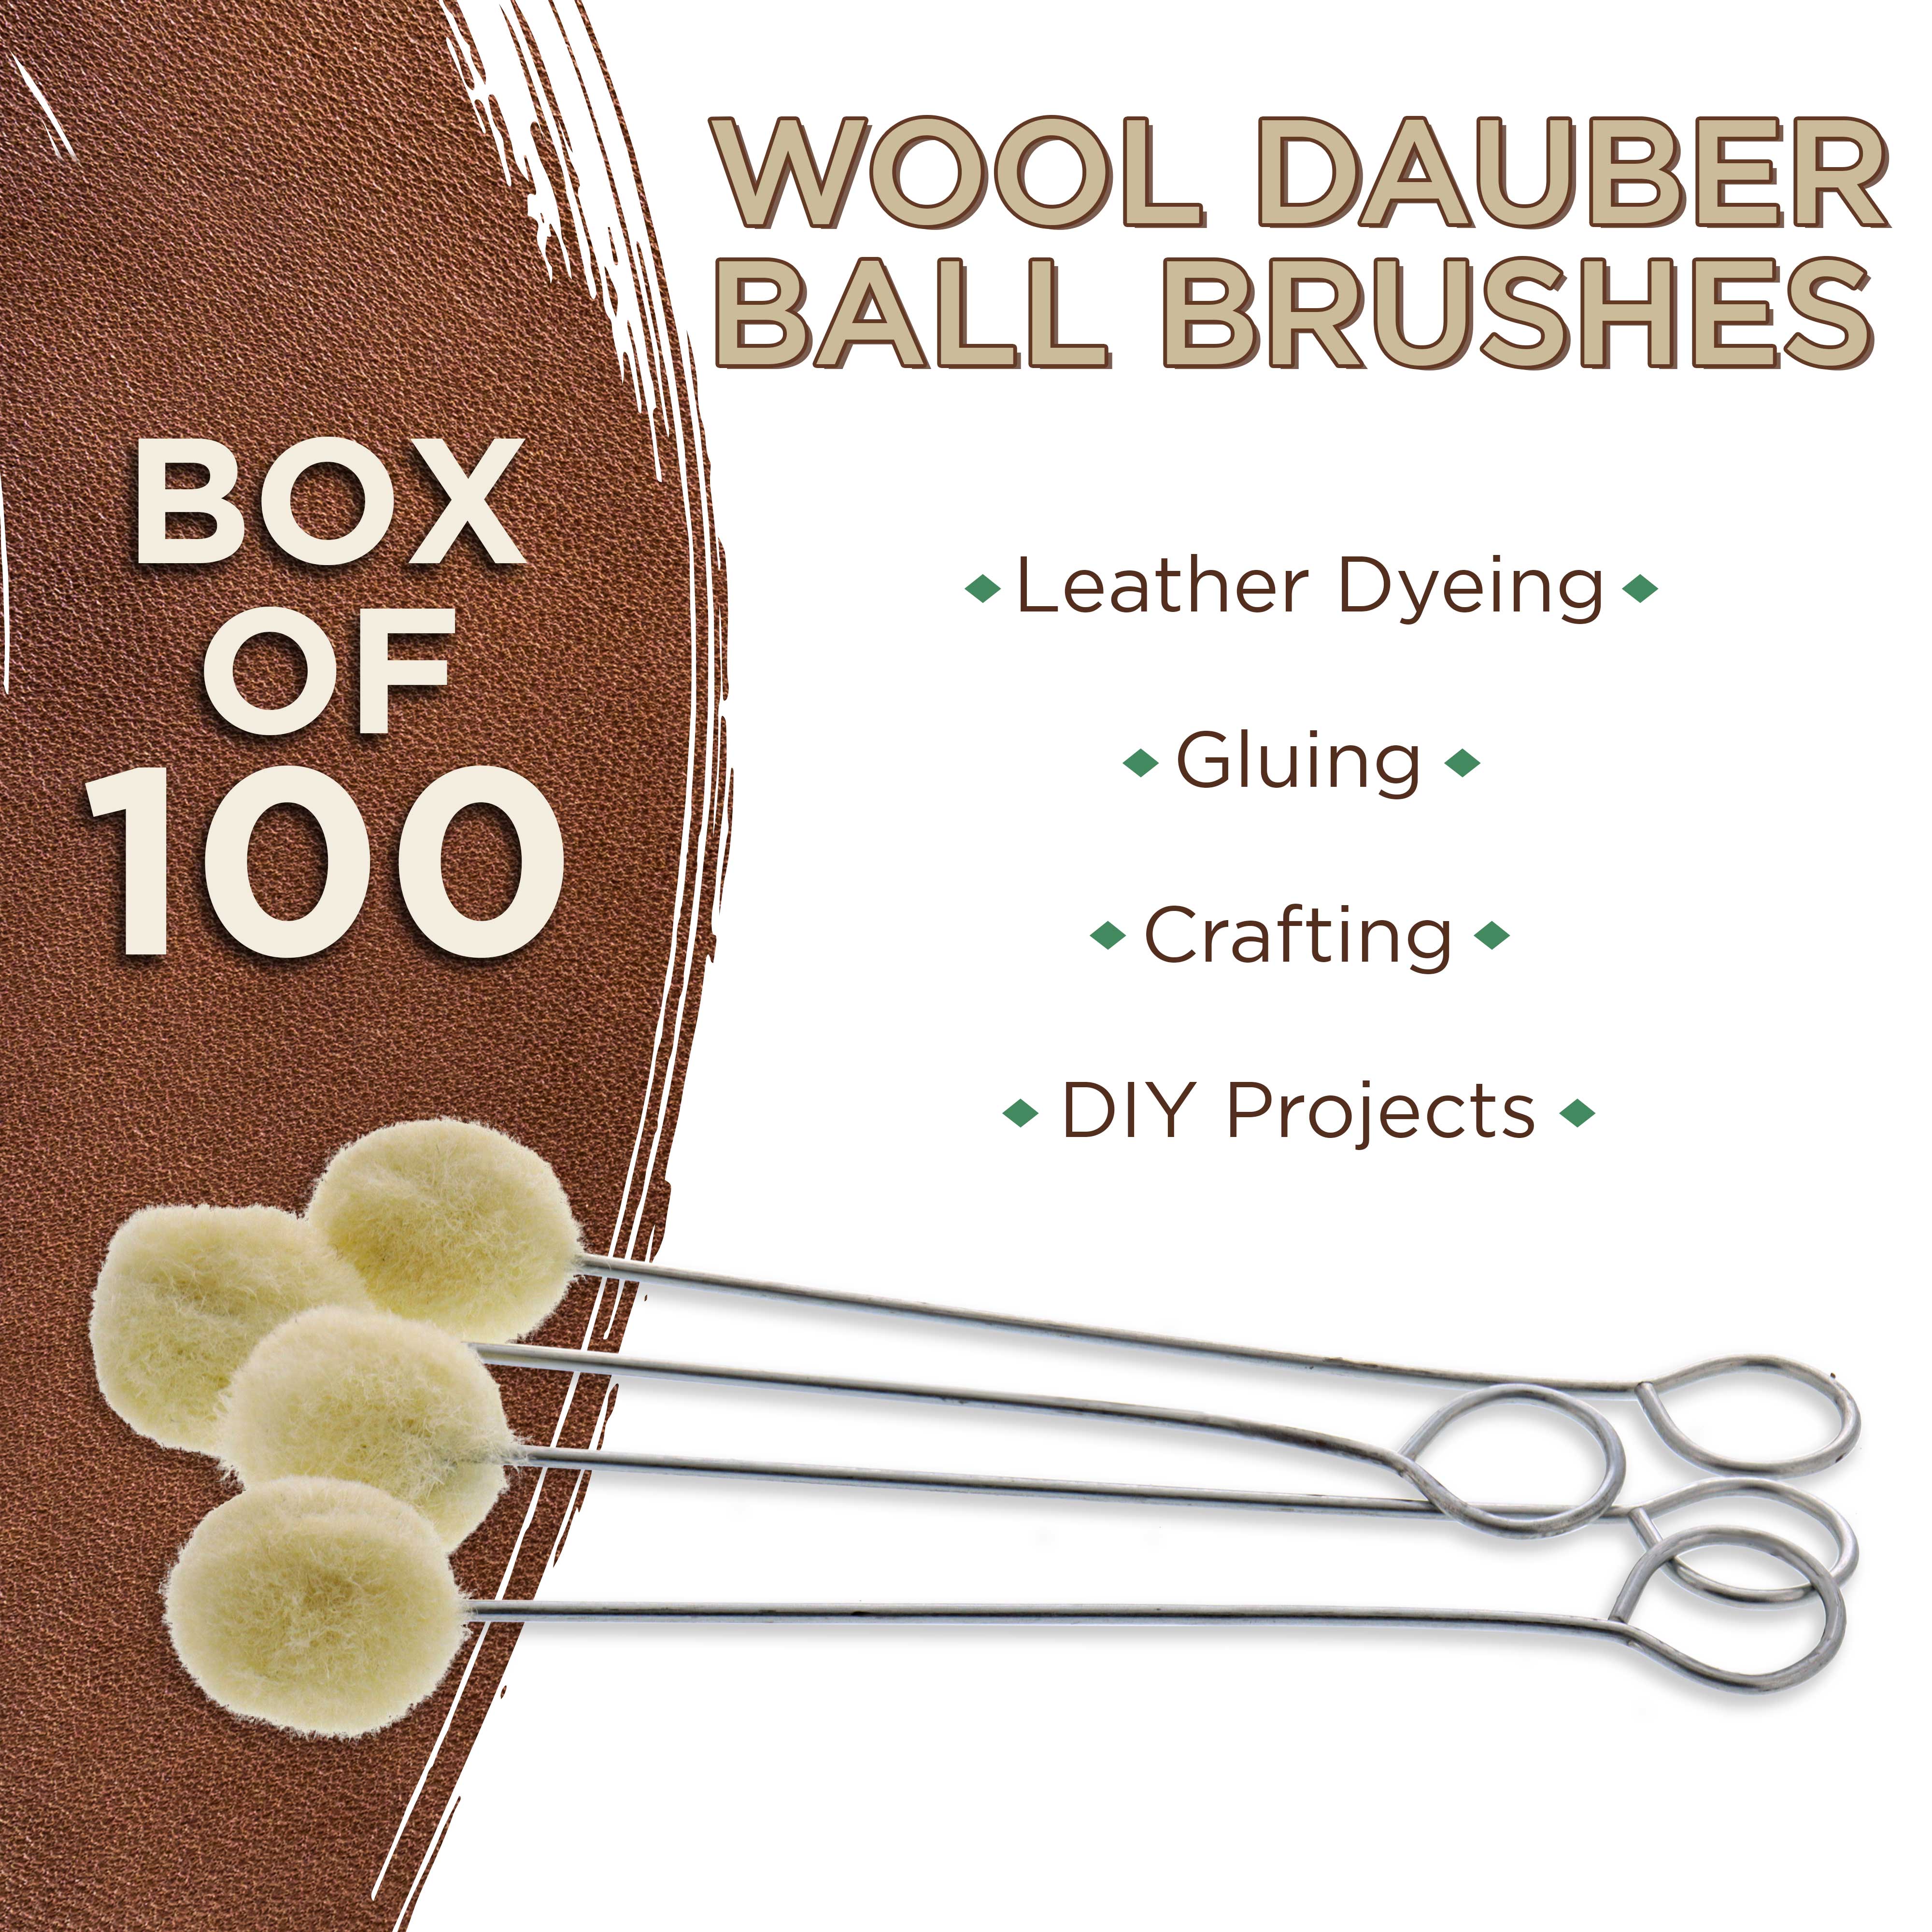 U.S. Art Supply - Wool Daubers Ball Brush (Pack of 100) - Applicator Tool  for Leather Dye, Dying, Staining, Crafting, DIY Crafts Projects, Gluing,  Contact Cement, Shoe Shine Polish - Daub, Swab, Wipe 